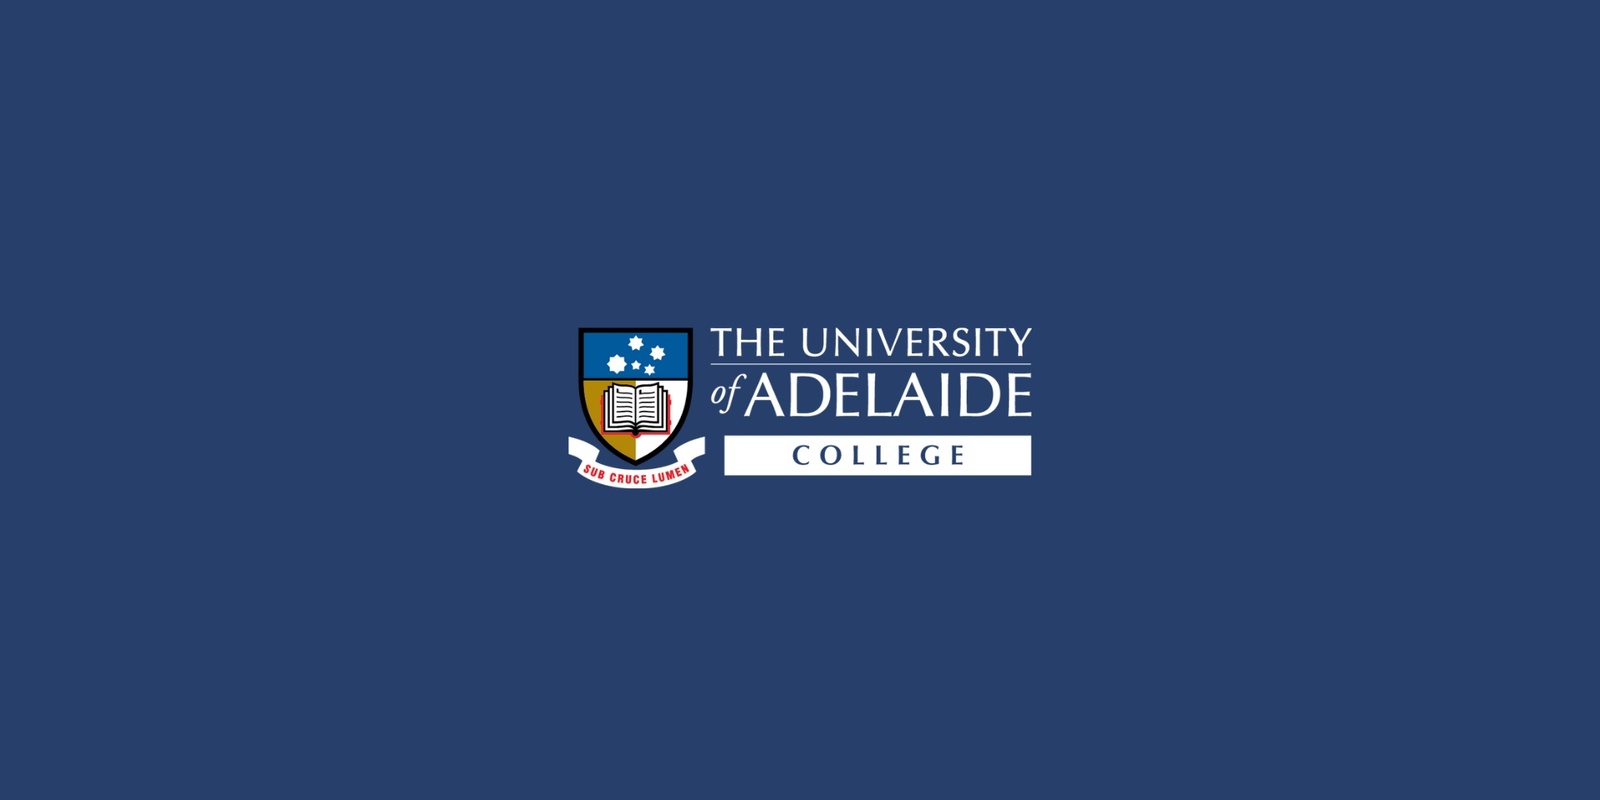 The University of Adelaide College's banner